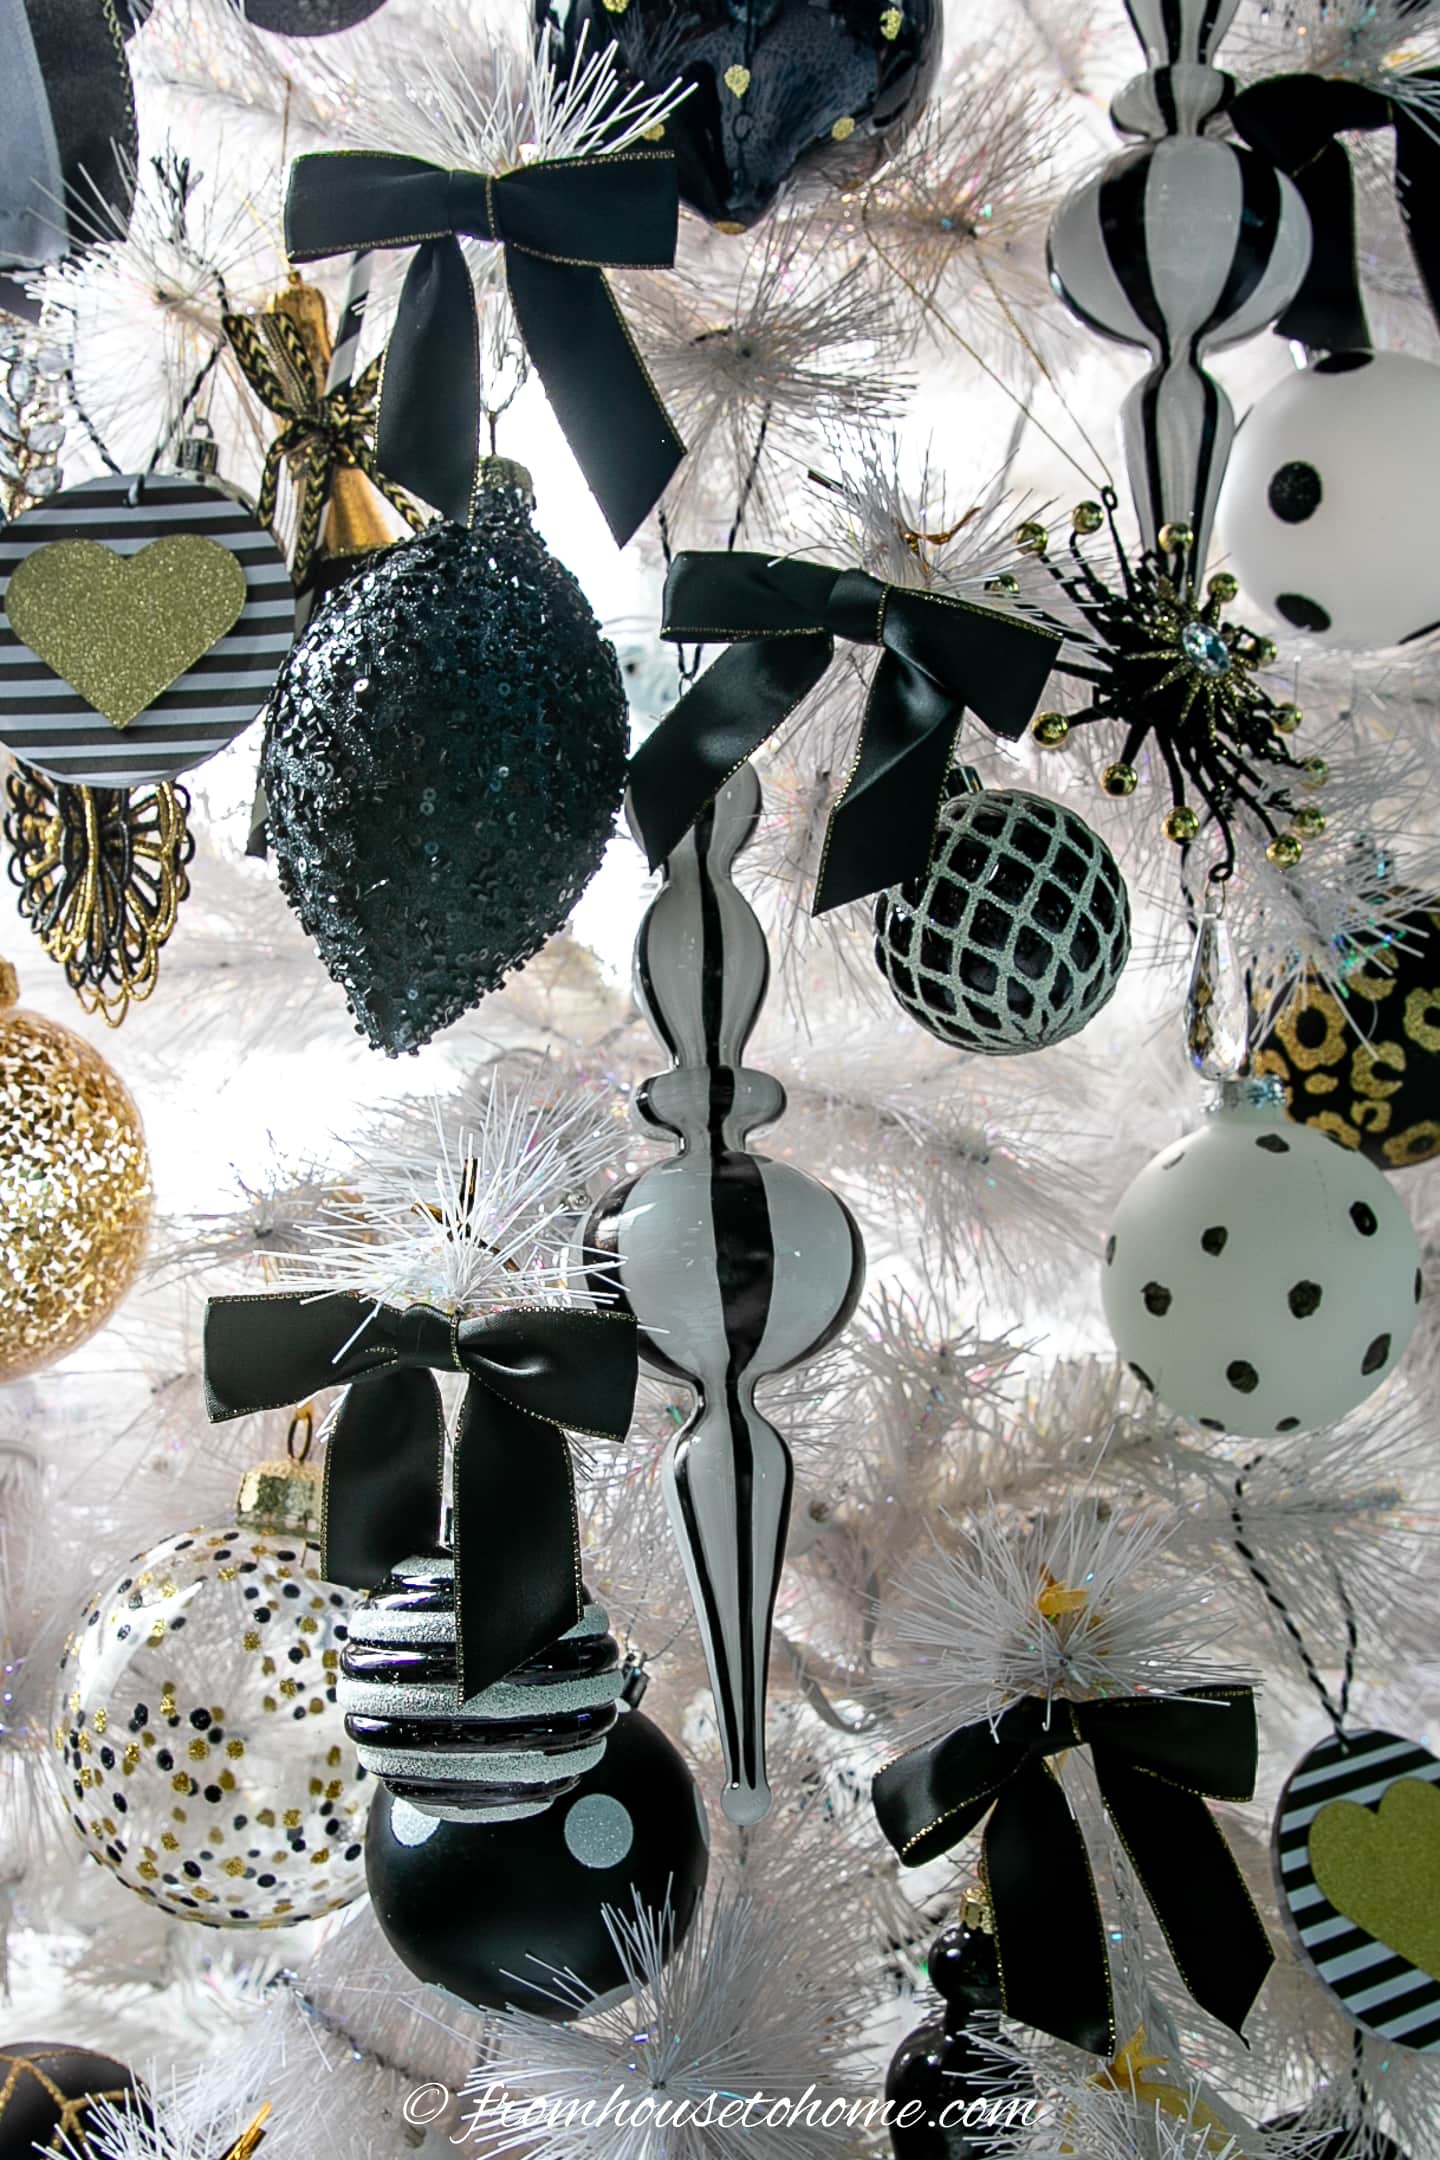 Black bows and other ornaments on a white tree